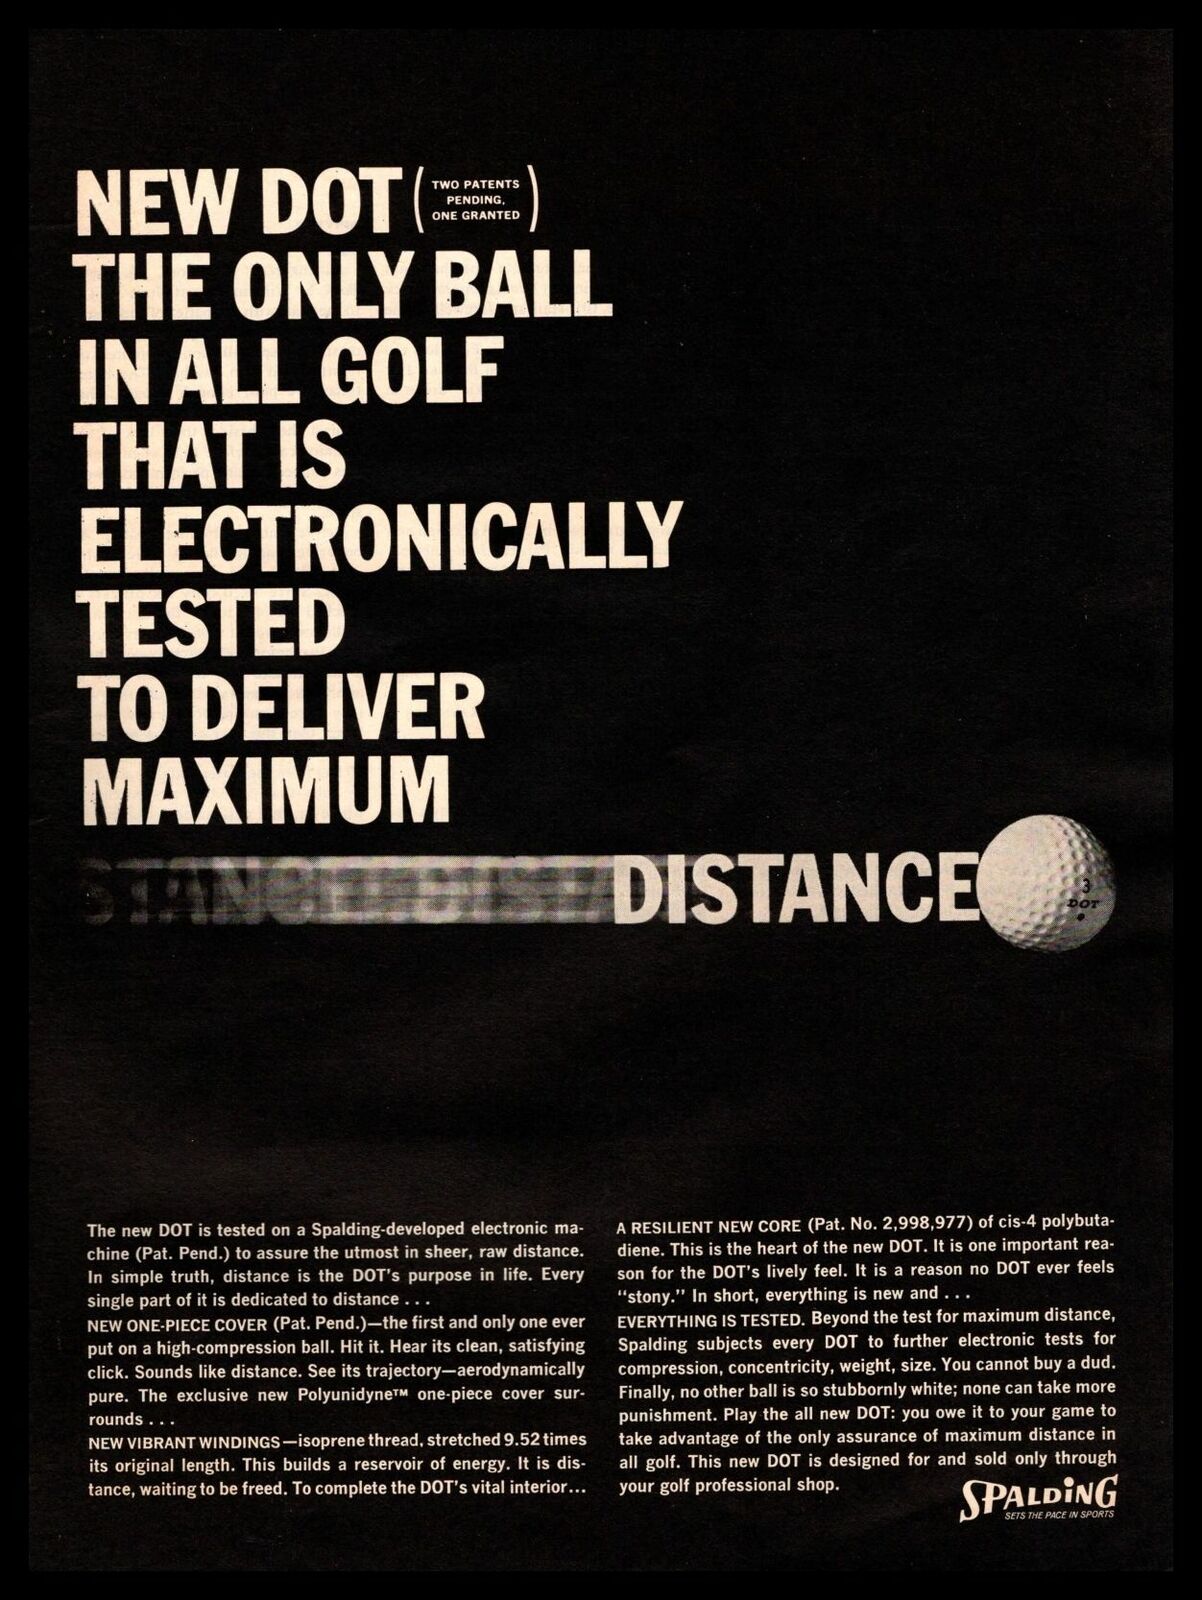 1963 Spalding Dot Golf Balls Electronically Tested For Maximum Distance Print Ad